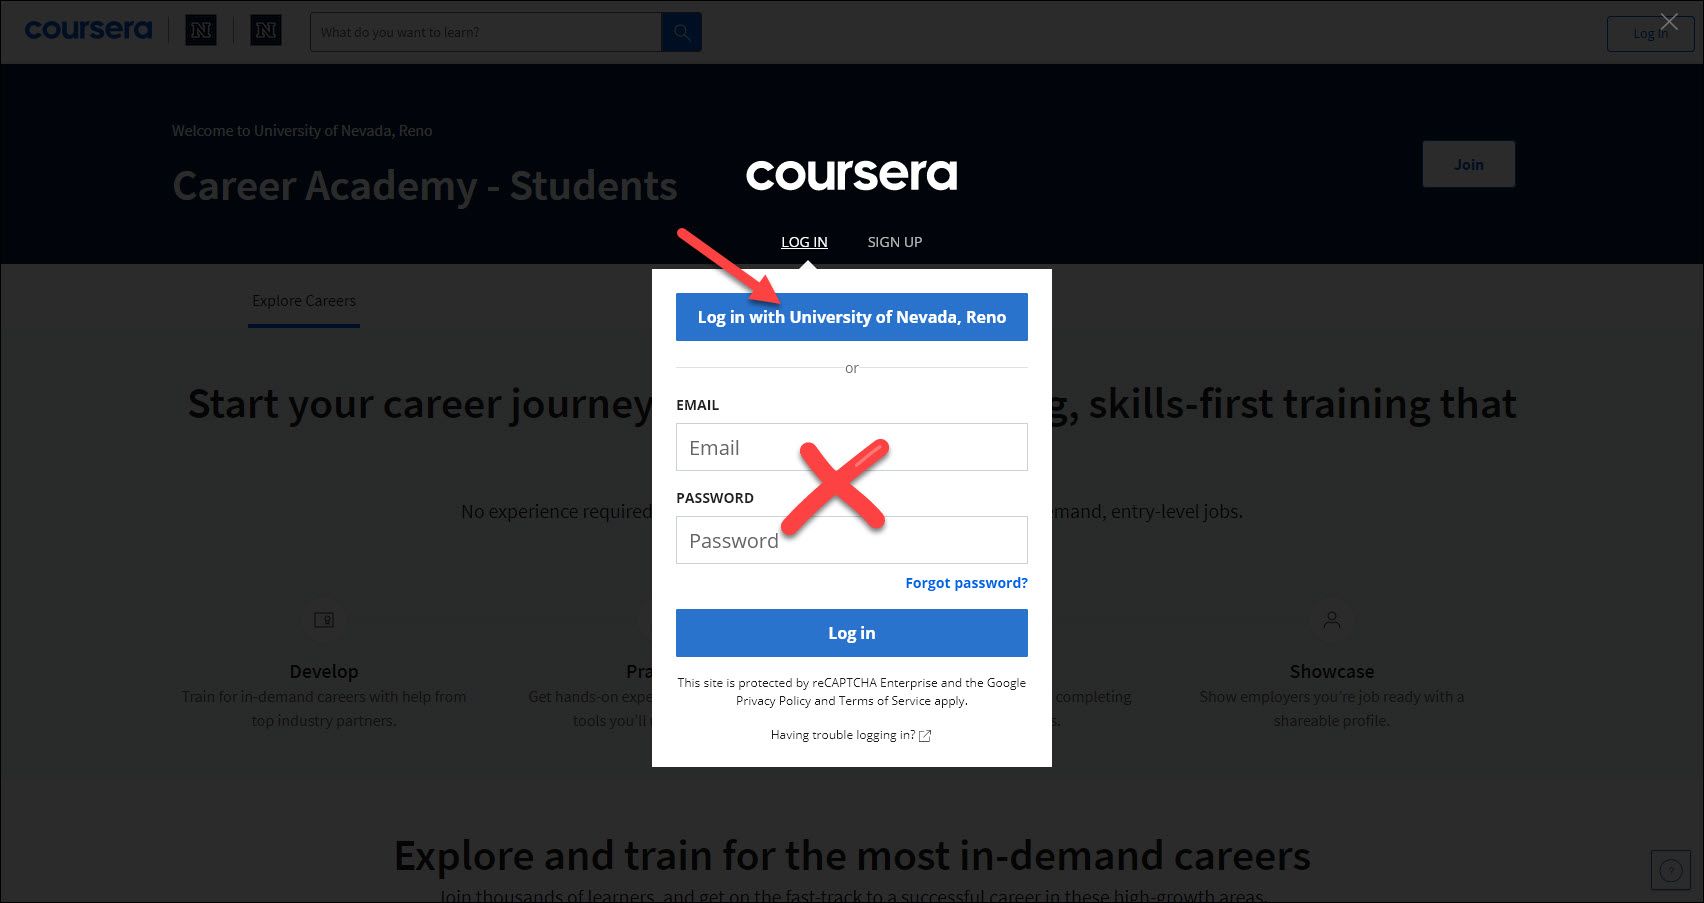 Screen shot of UNR Coursera Career Academy – Students login screen. An arrow highlights the “Log in with University of Nevada, Reno” button. An “X” is marking out the email and password fields.